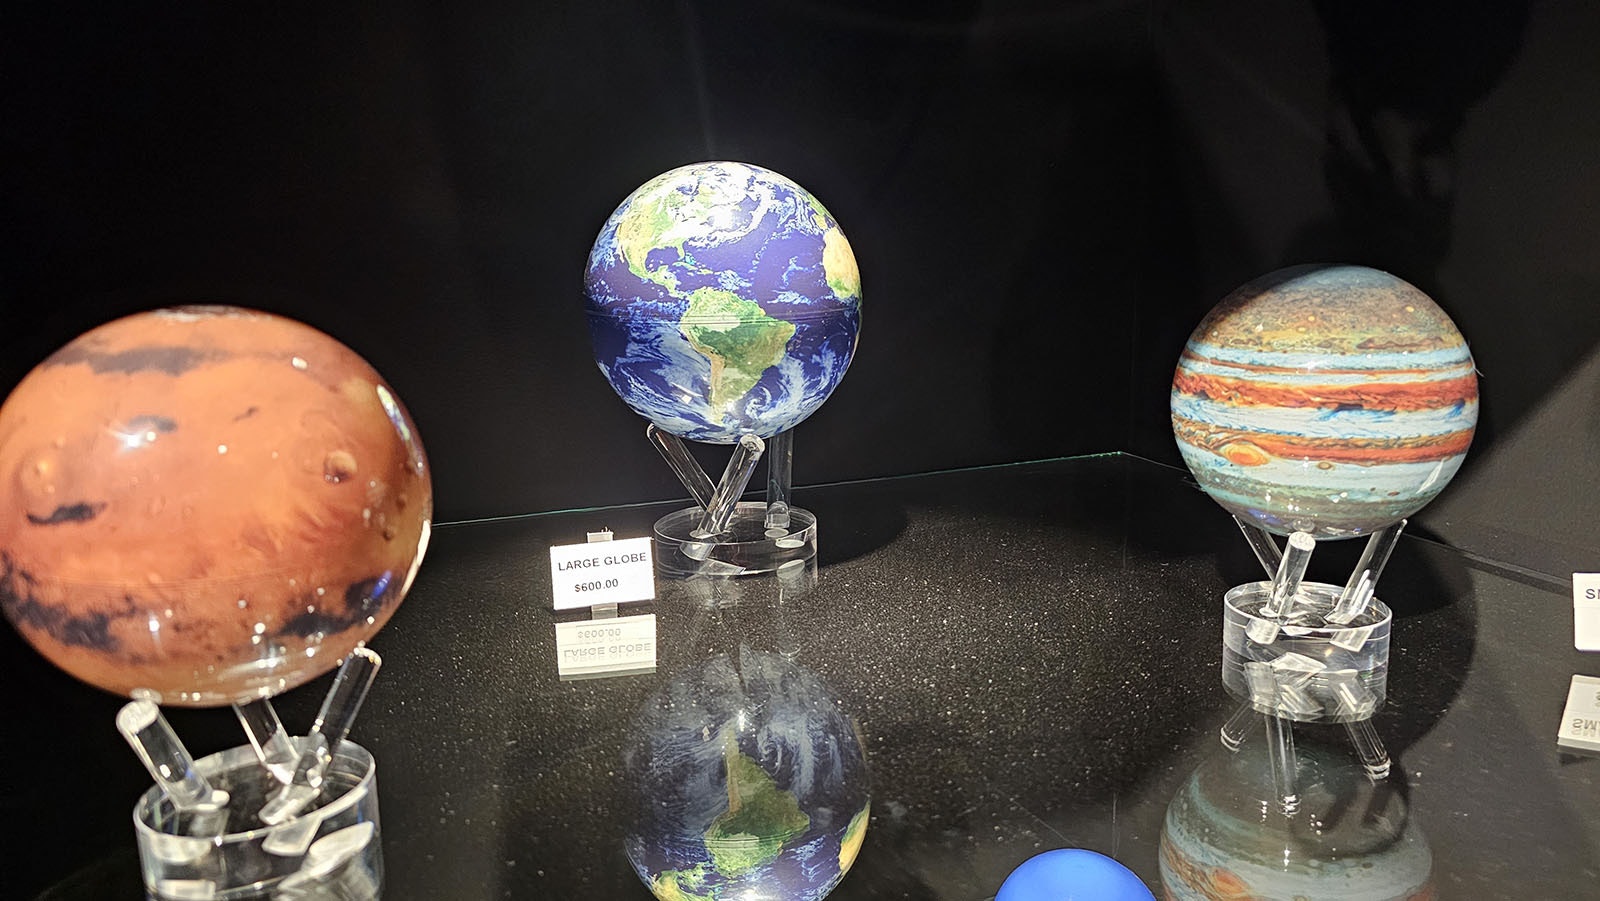 The souvenir shop has spinning balls hat replicate Earth, Mars and Jupiter.